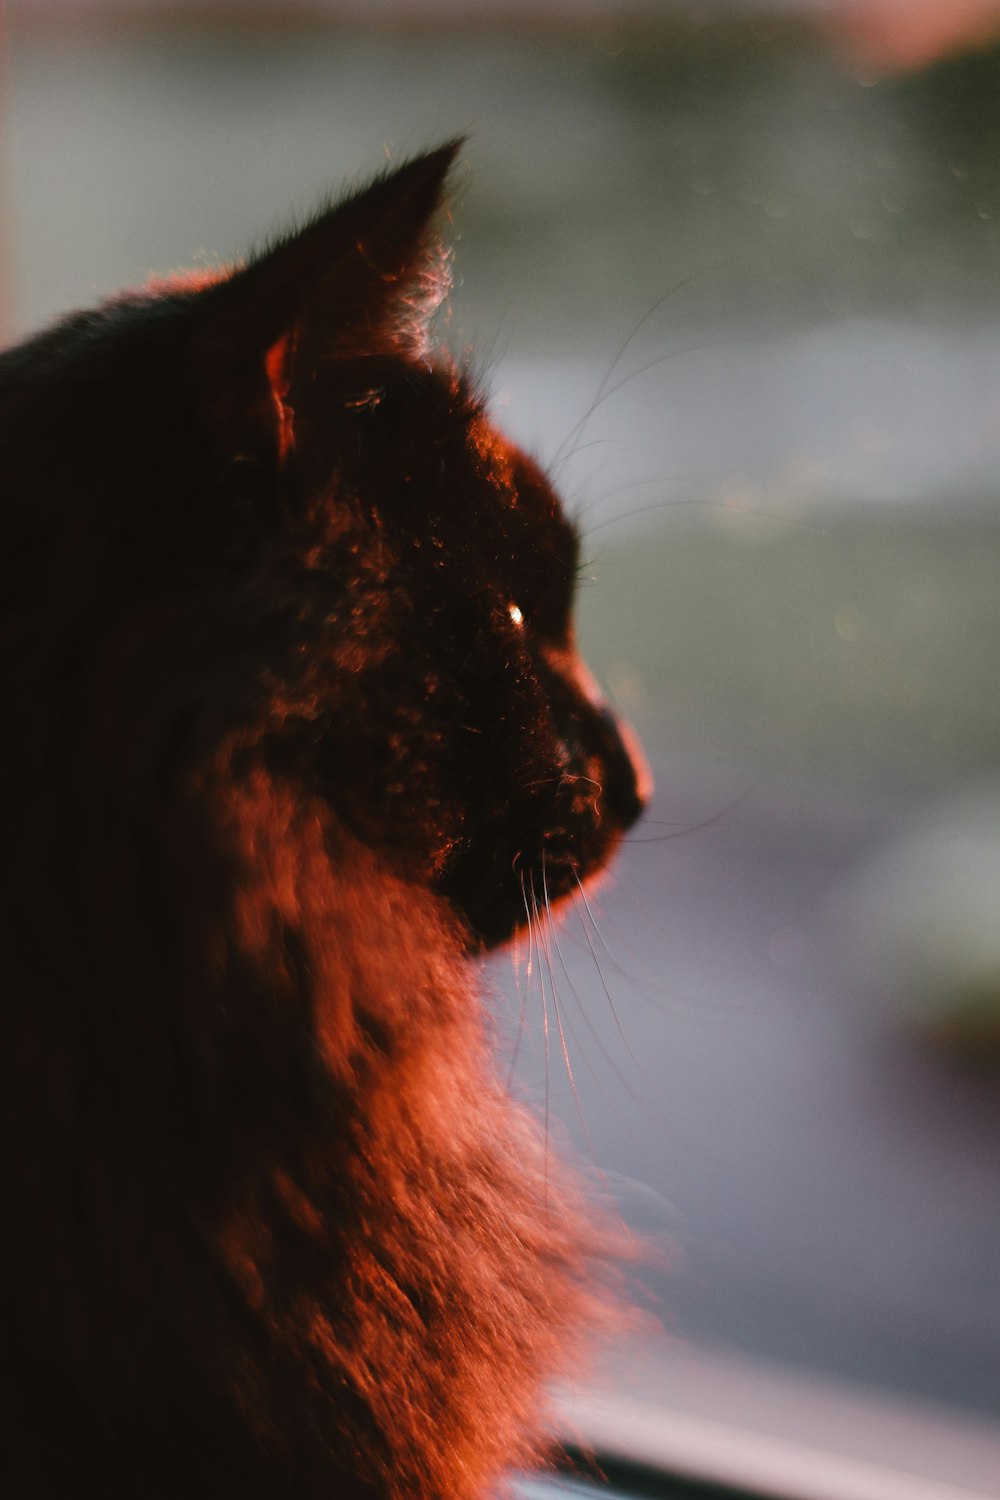 Cat Sun Pictures  Download Free Images on Unsplash